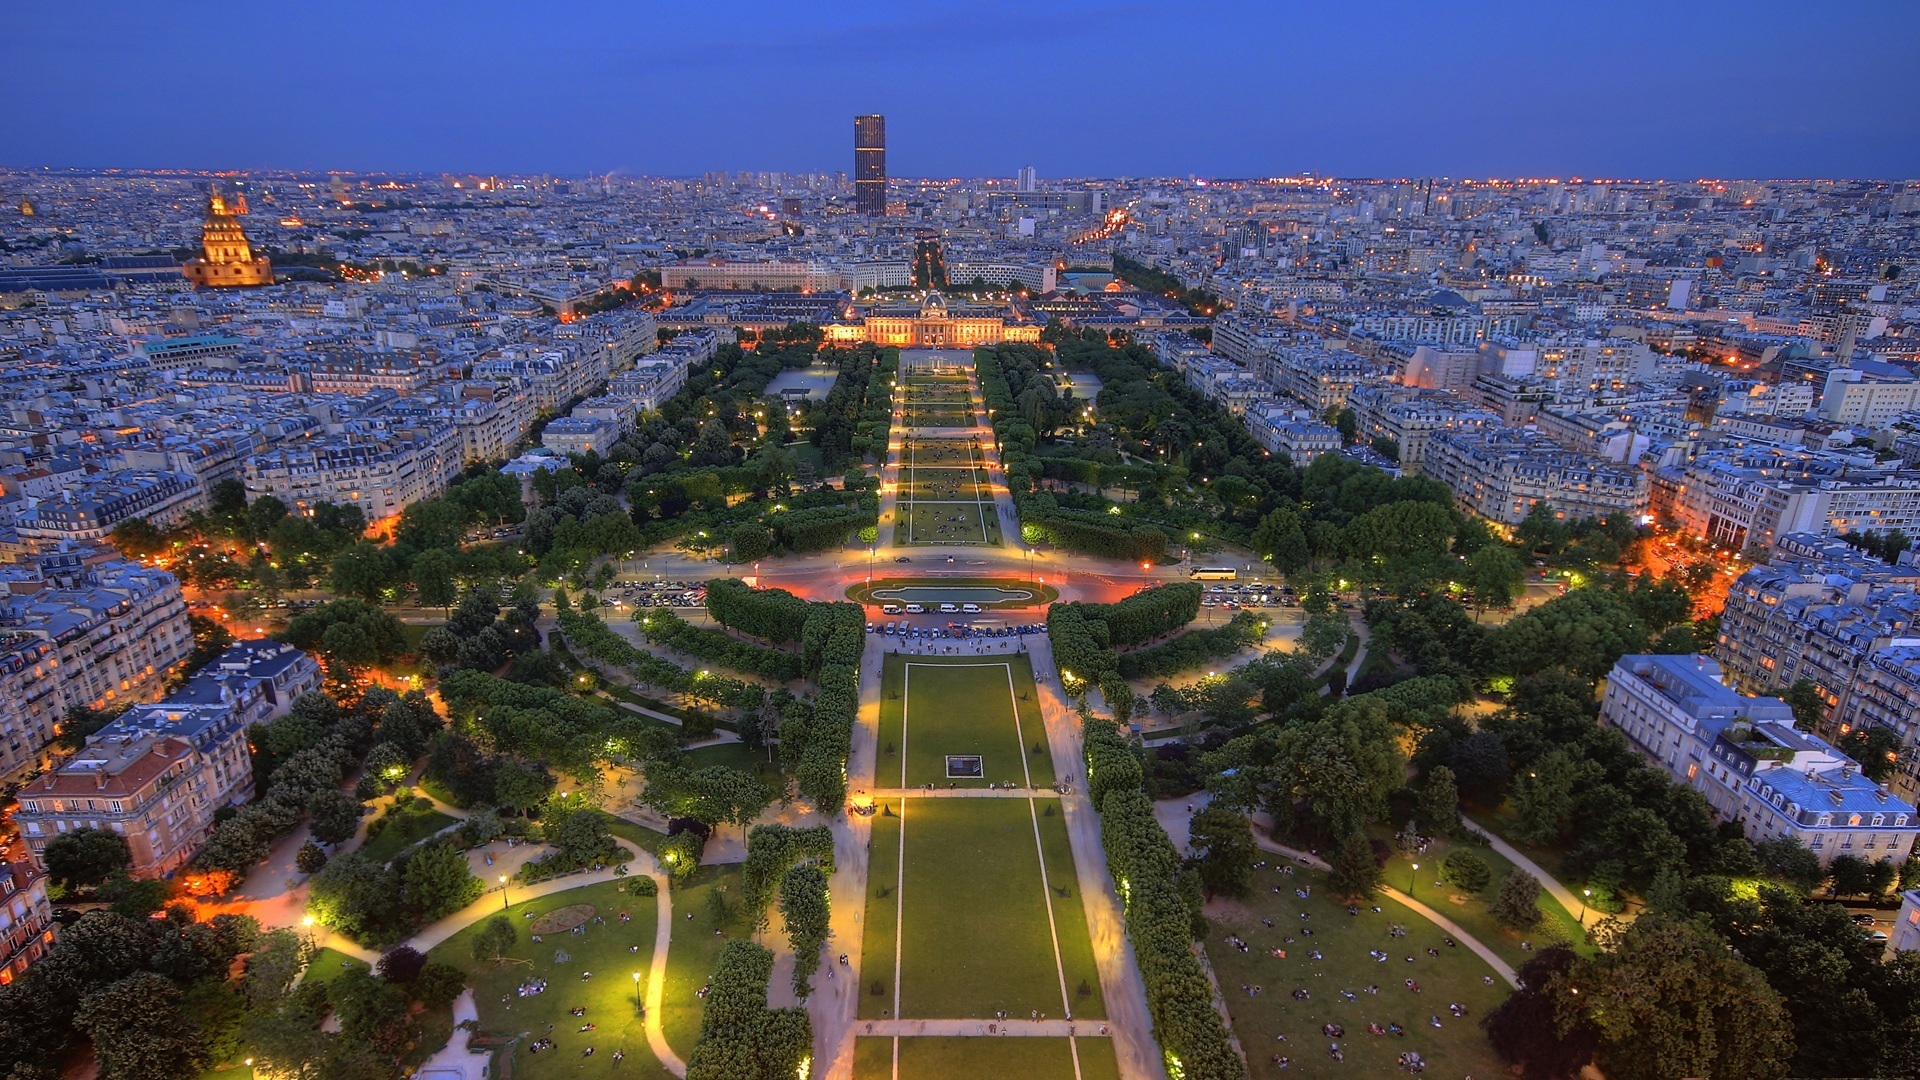 View of the Champ de Mars from the Eiffel Tower